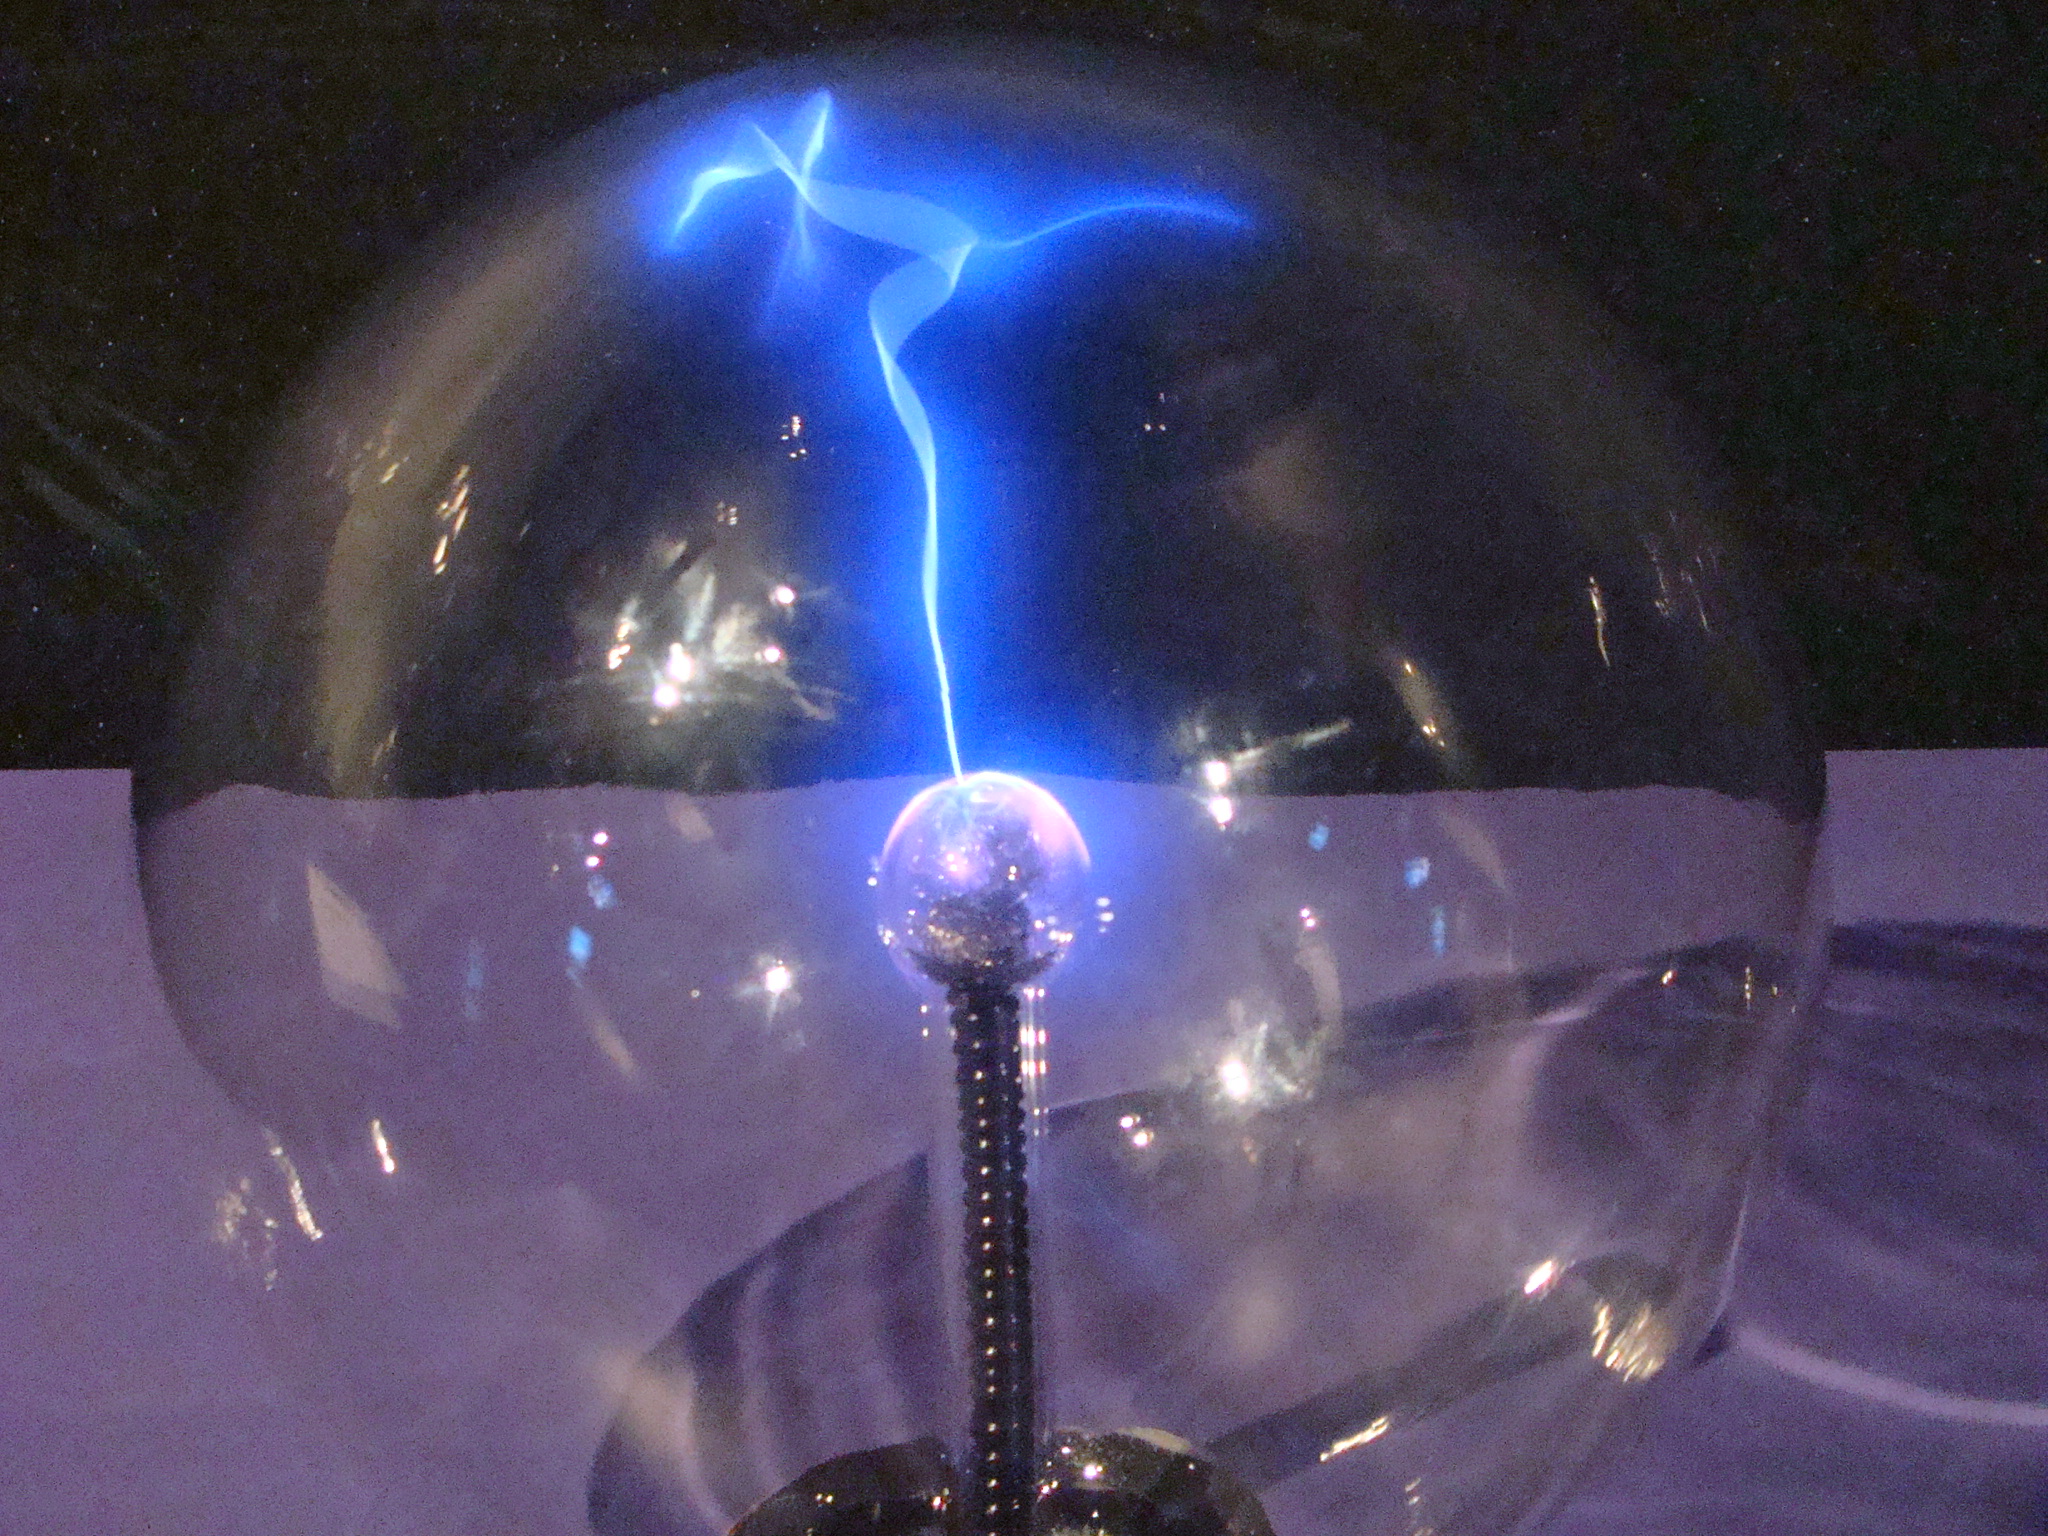 Tesla Coil Wallpaper Images Pictures   Becuo